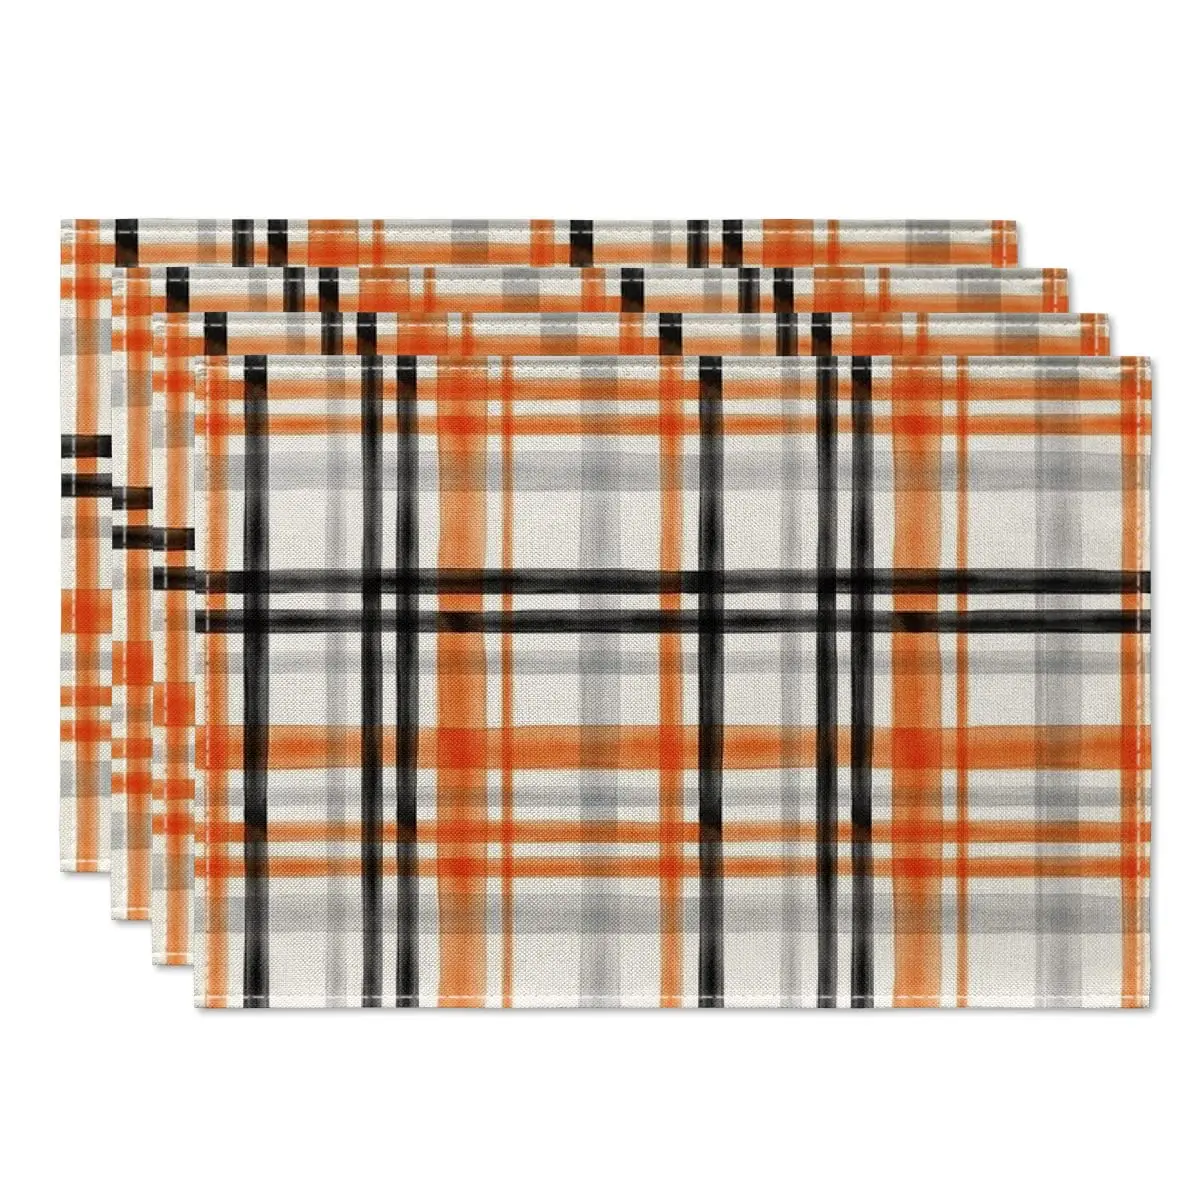 

Orange Black Buffalo Plaid Fall Placemats Set of 4, 12x18 Inch Halloween Seasonal Table Mats for Party Kitchen Dining Decoration